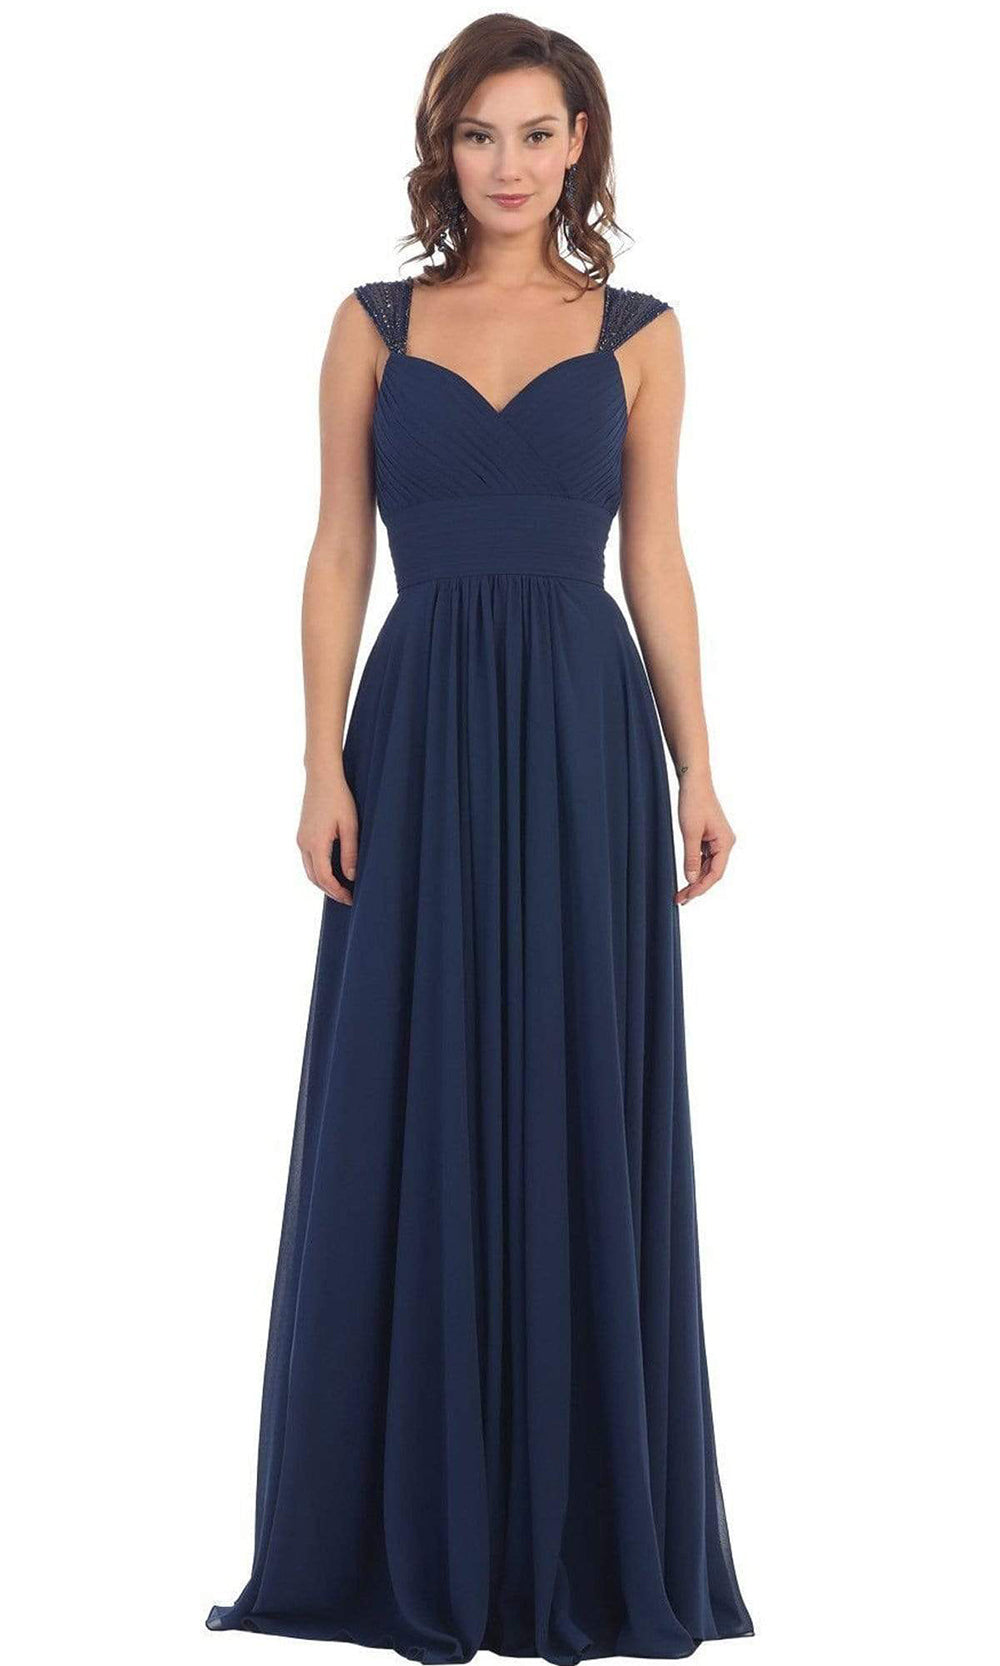 May Queen - Pleated Bodice A-Line Dress MQ1275 - 1 pc Navy In Size 20 Available CCSALE 20 / Navy